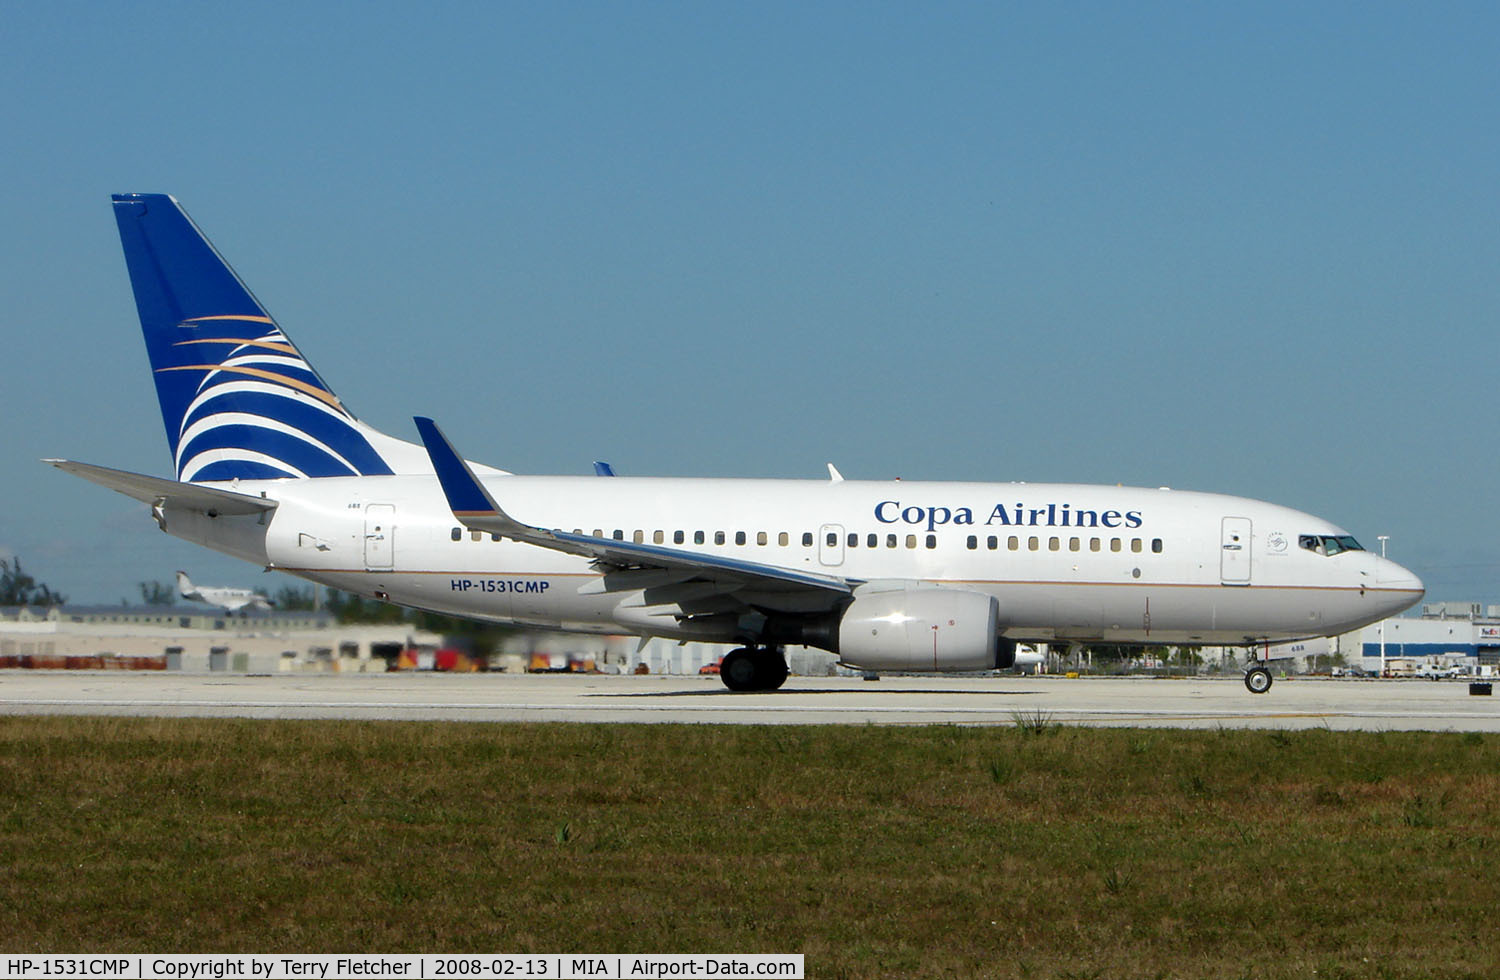 HP-1531CMP, 2006 Boeing 737-7V3 C/N 34536, Copa Airlines of Panama B737 prepares to take off from Miami